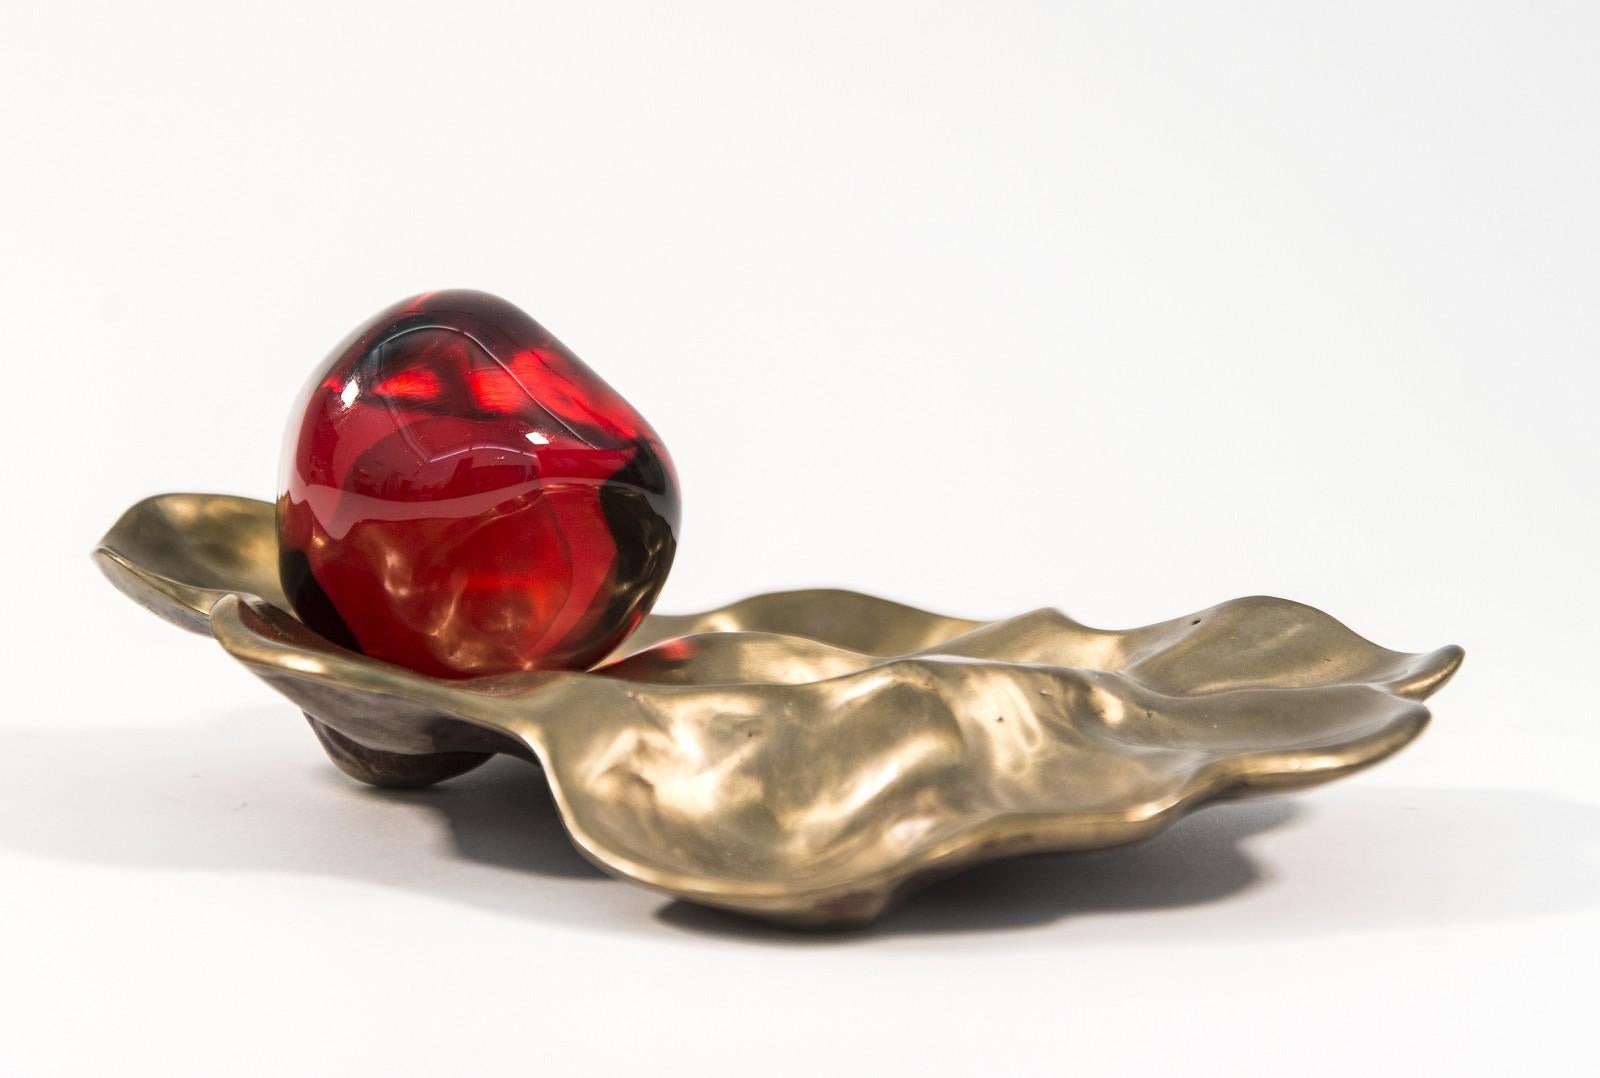 Pomegranate with Casing - small, bright red, glass, bronze, still life sculpture